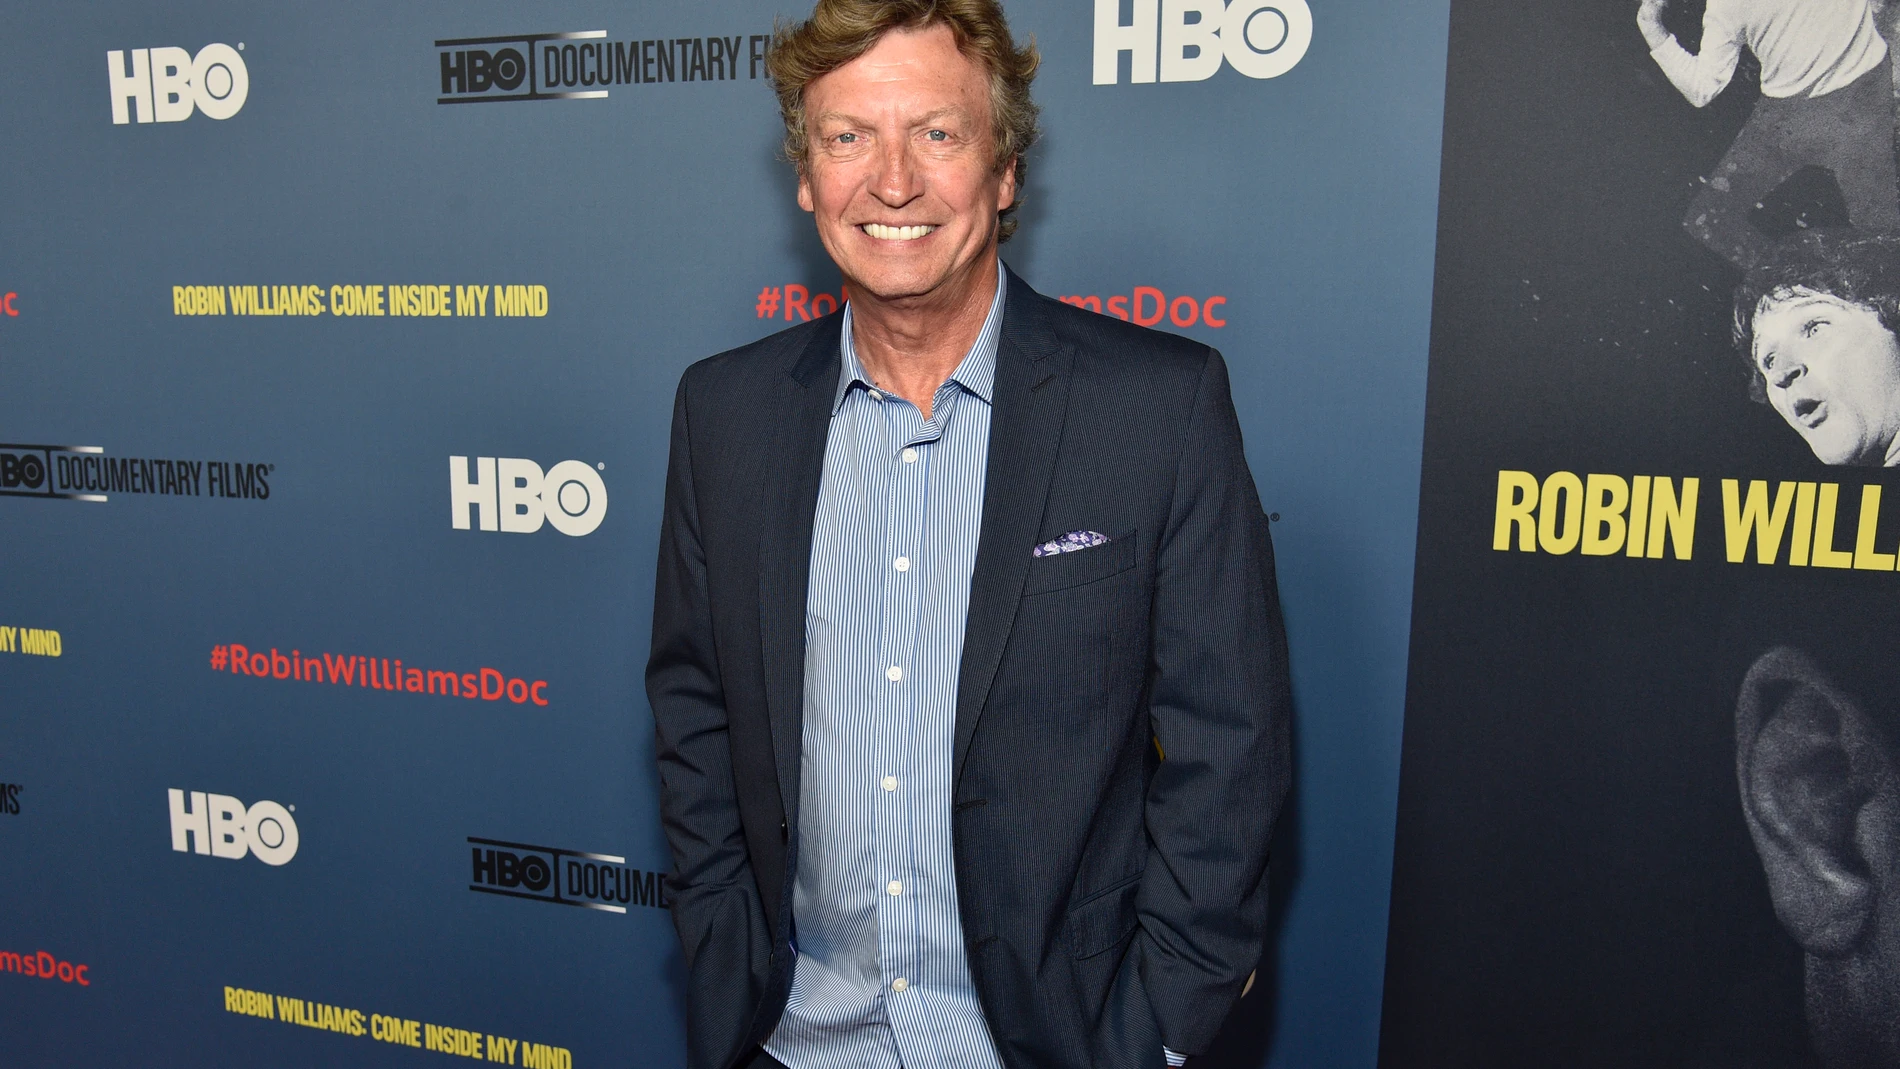 FILE - Nigel Lythgoe arrives at the Los Angeles premiere of "Robin Williams: Come Inside My Mind" at the TCL Chinese Theatre on June 27, 2018. Paula Abdul has accused former “American Idol” producer Lythgoe of sexually assaulting her in the early 2000s when she was a judge on the reality competition show, according to a new lawsuit filed Friday, Dec. 29, 2023. (Photo by Chris Pizzello/Invision/AP, File)